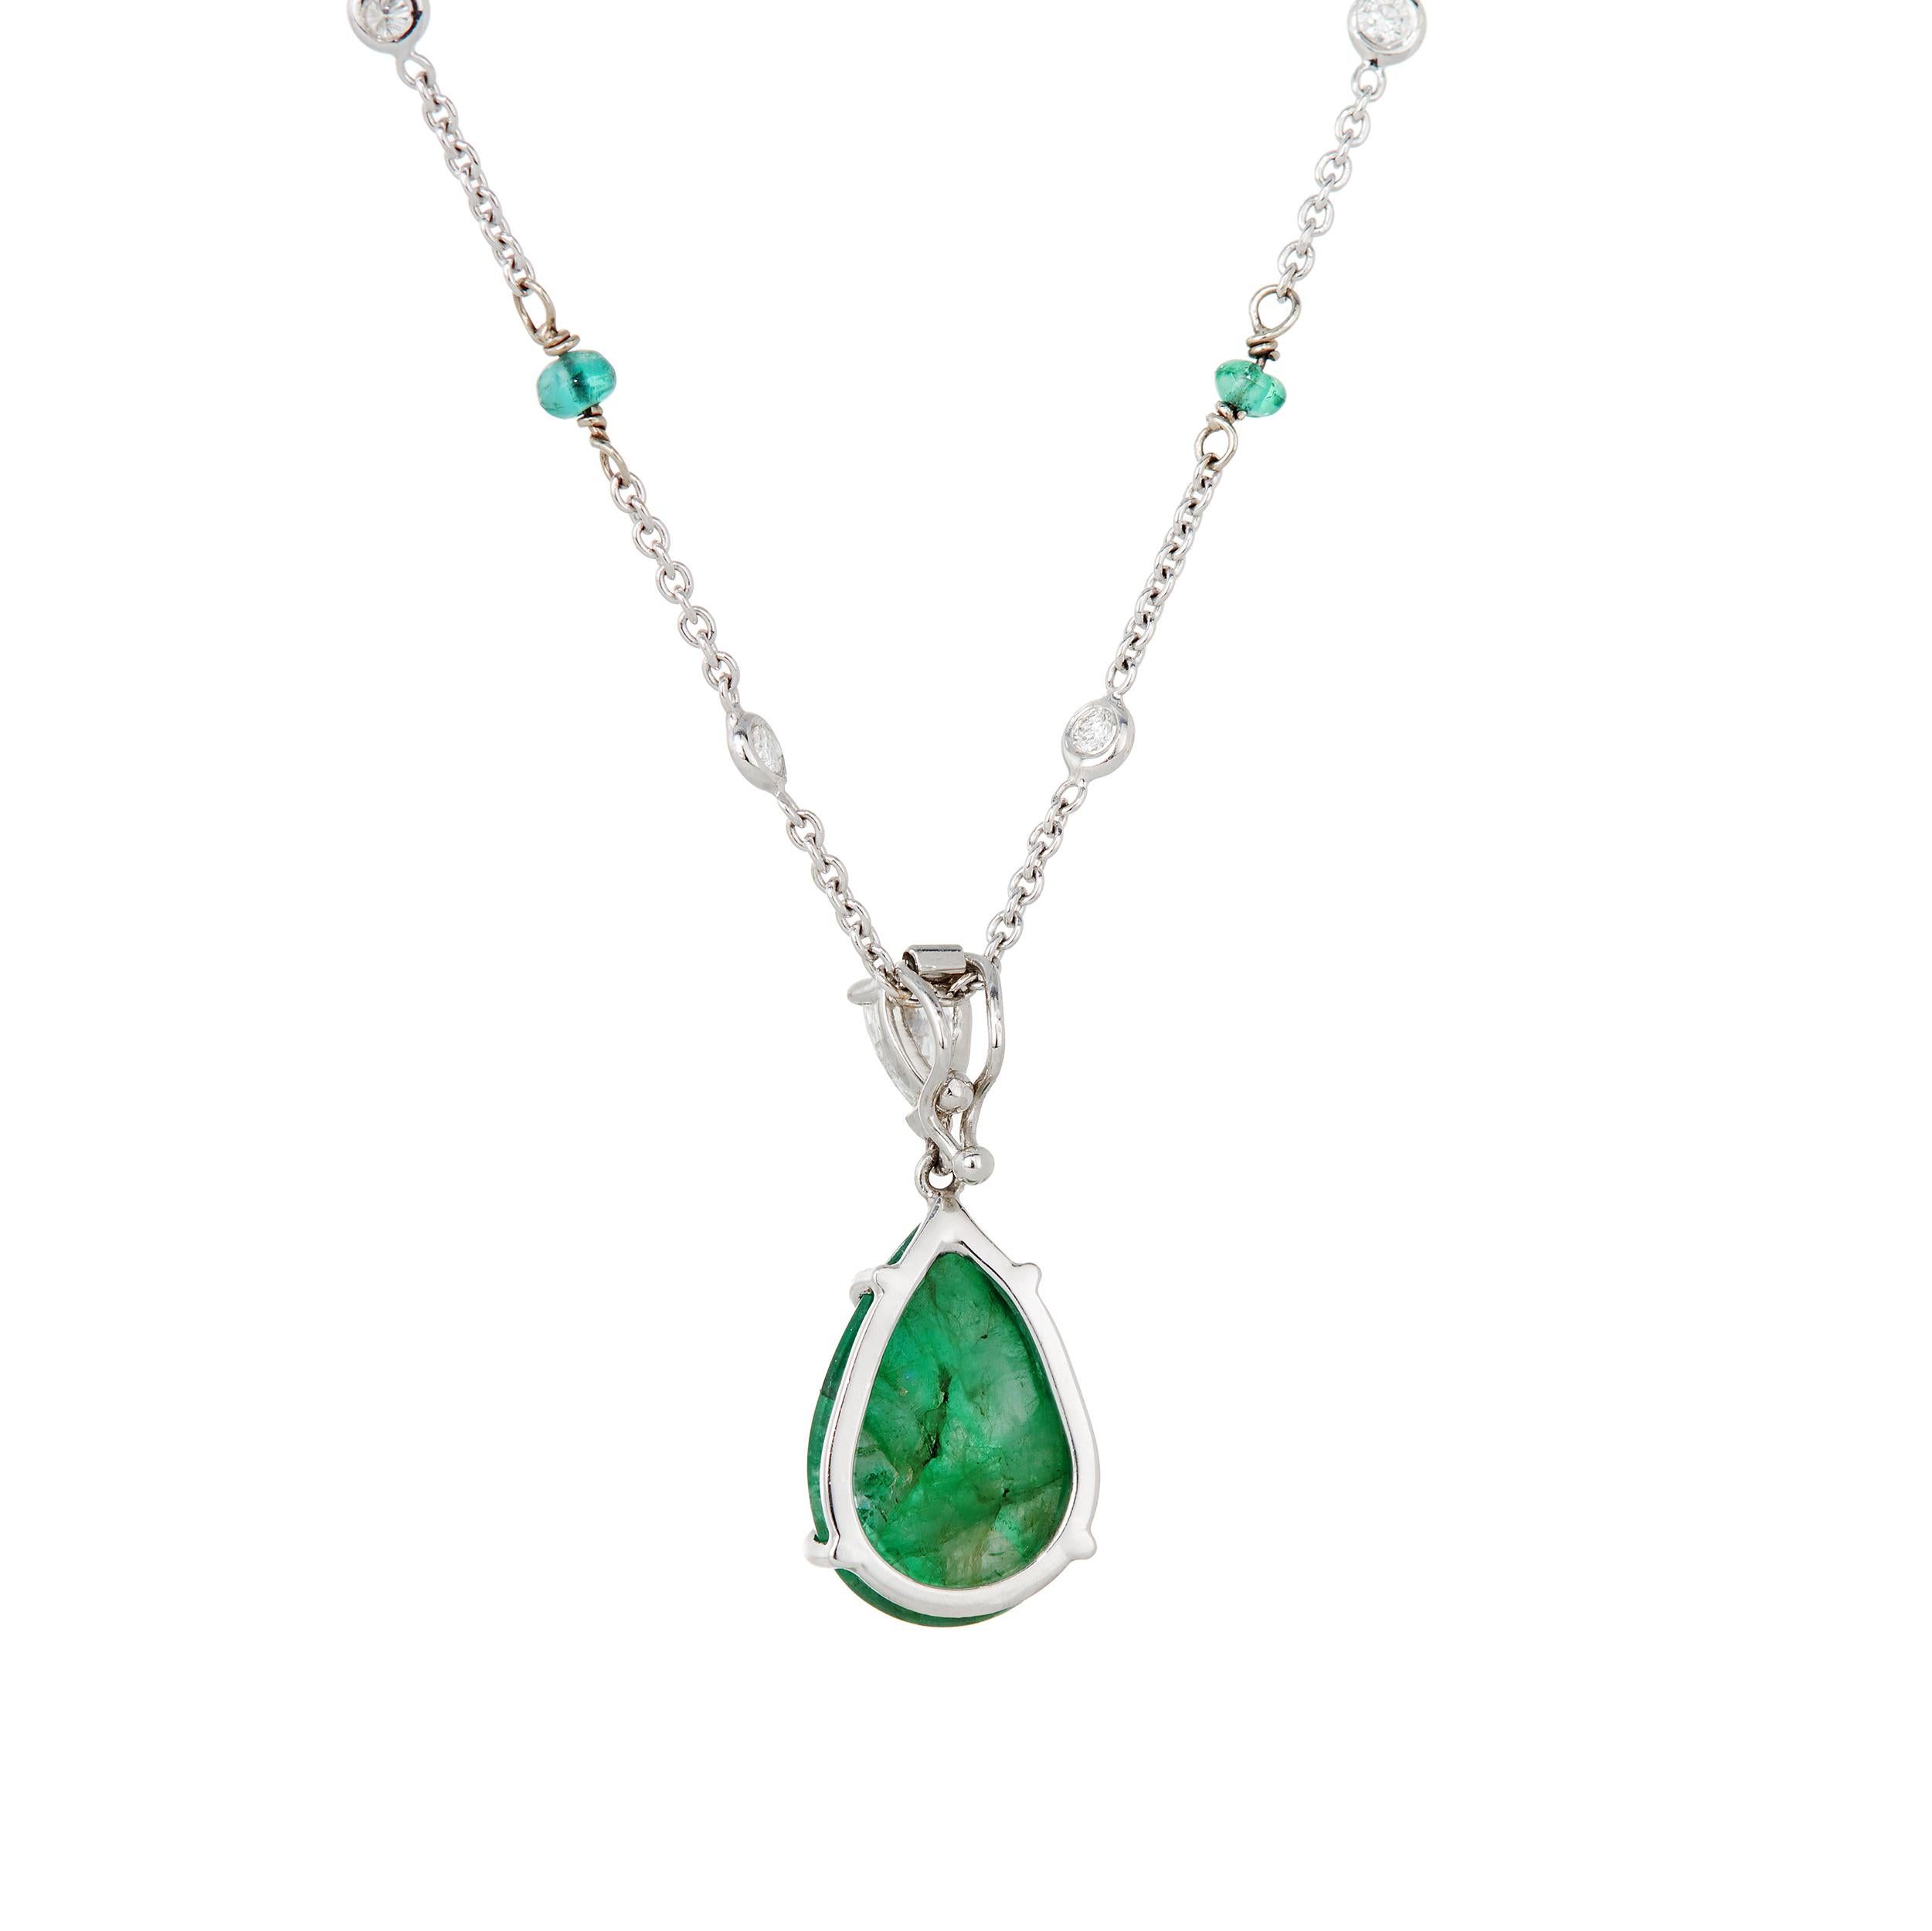 Modern 5.77 Carat Emerald and Diamond Necklace in Platinum with Diamonds by Yard Chain